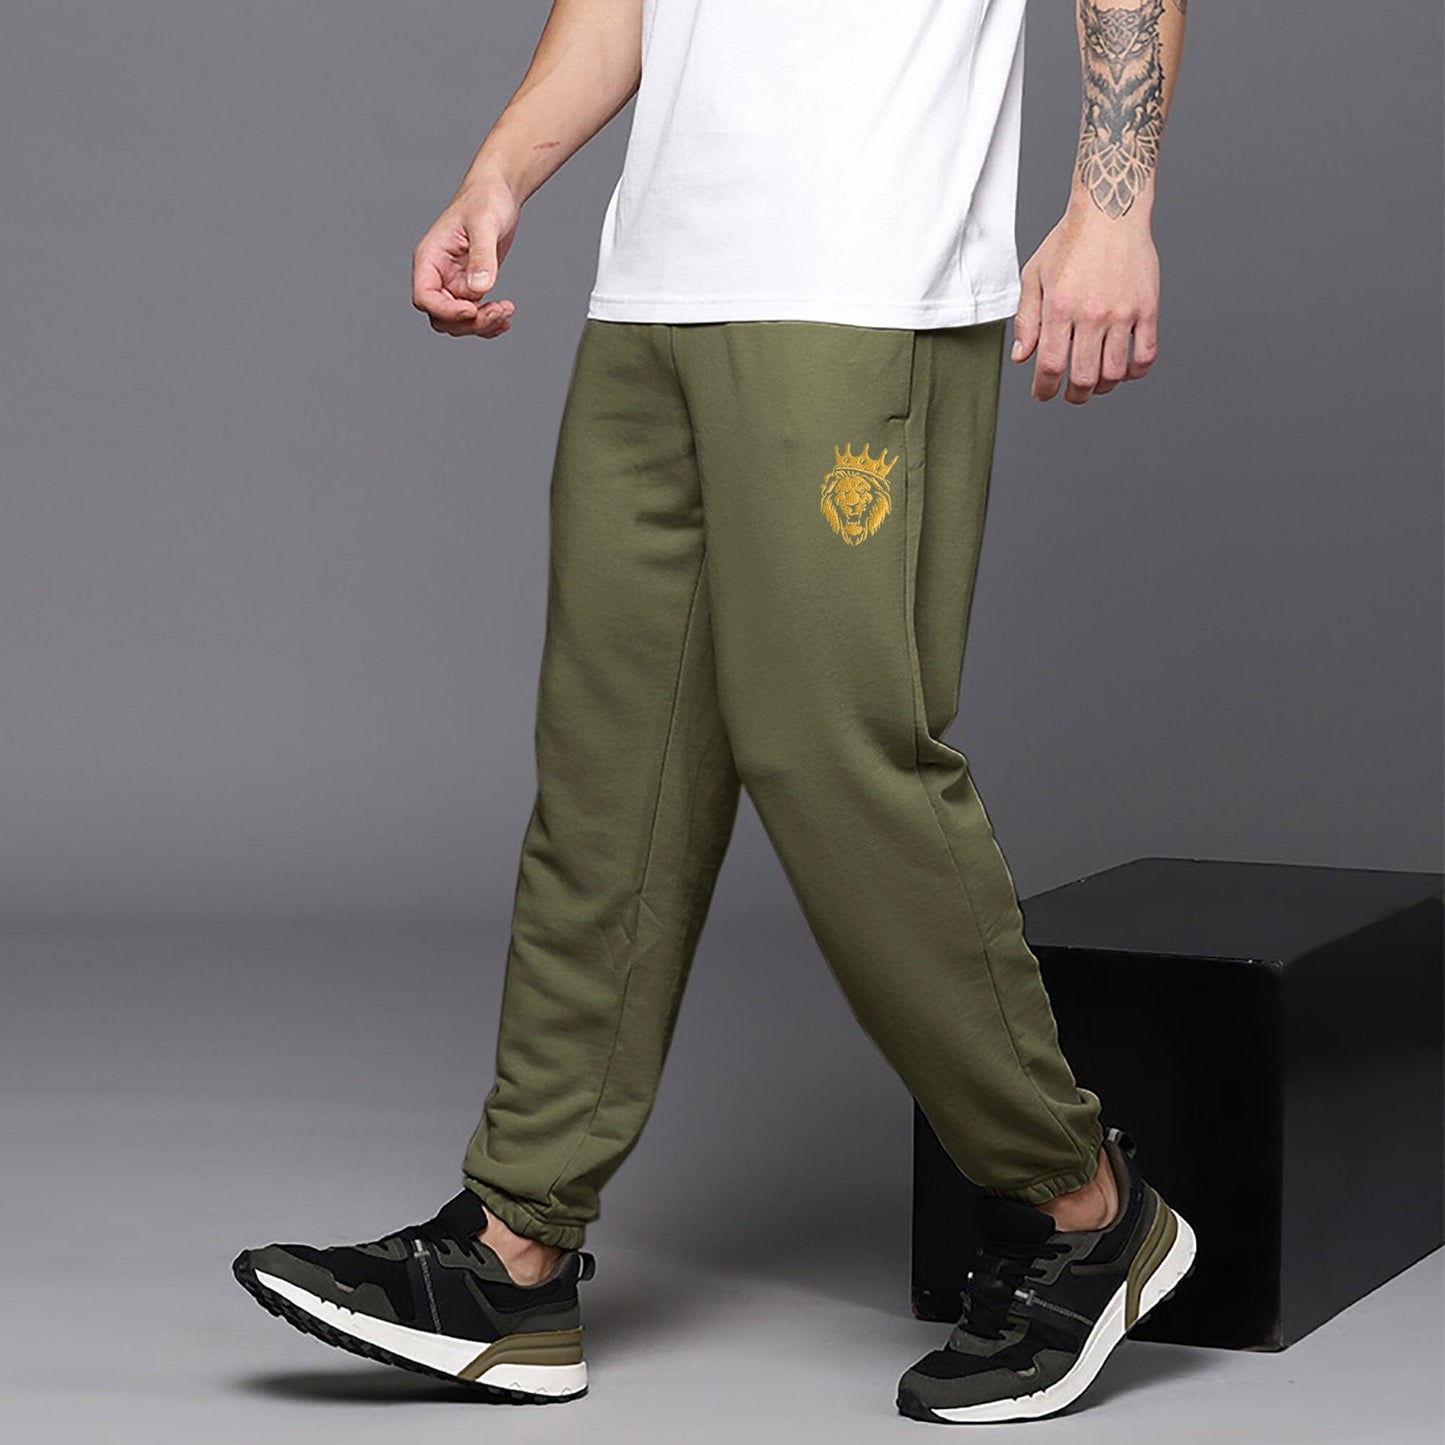 MAX 21 Men's Tiger Embroidered Fleece Joggers Pants Men's Trousers SZK Olive S 